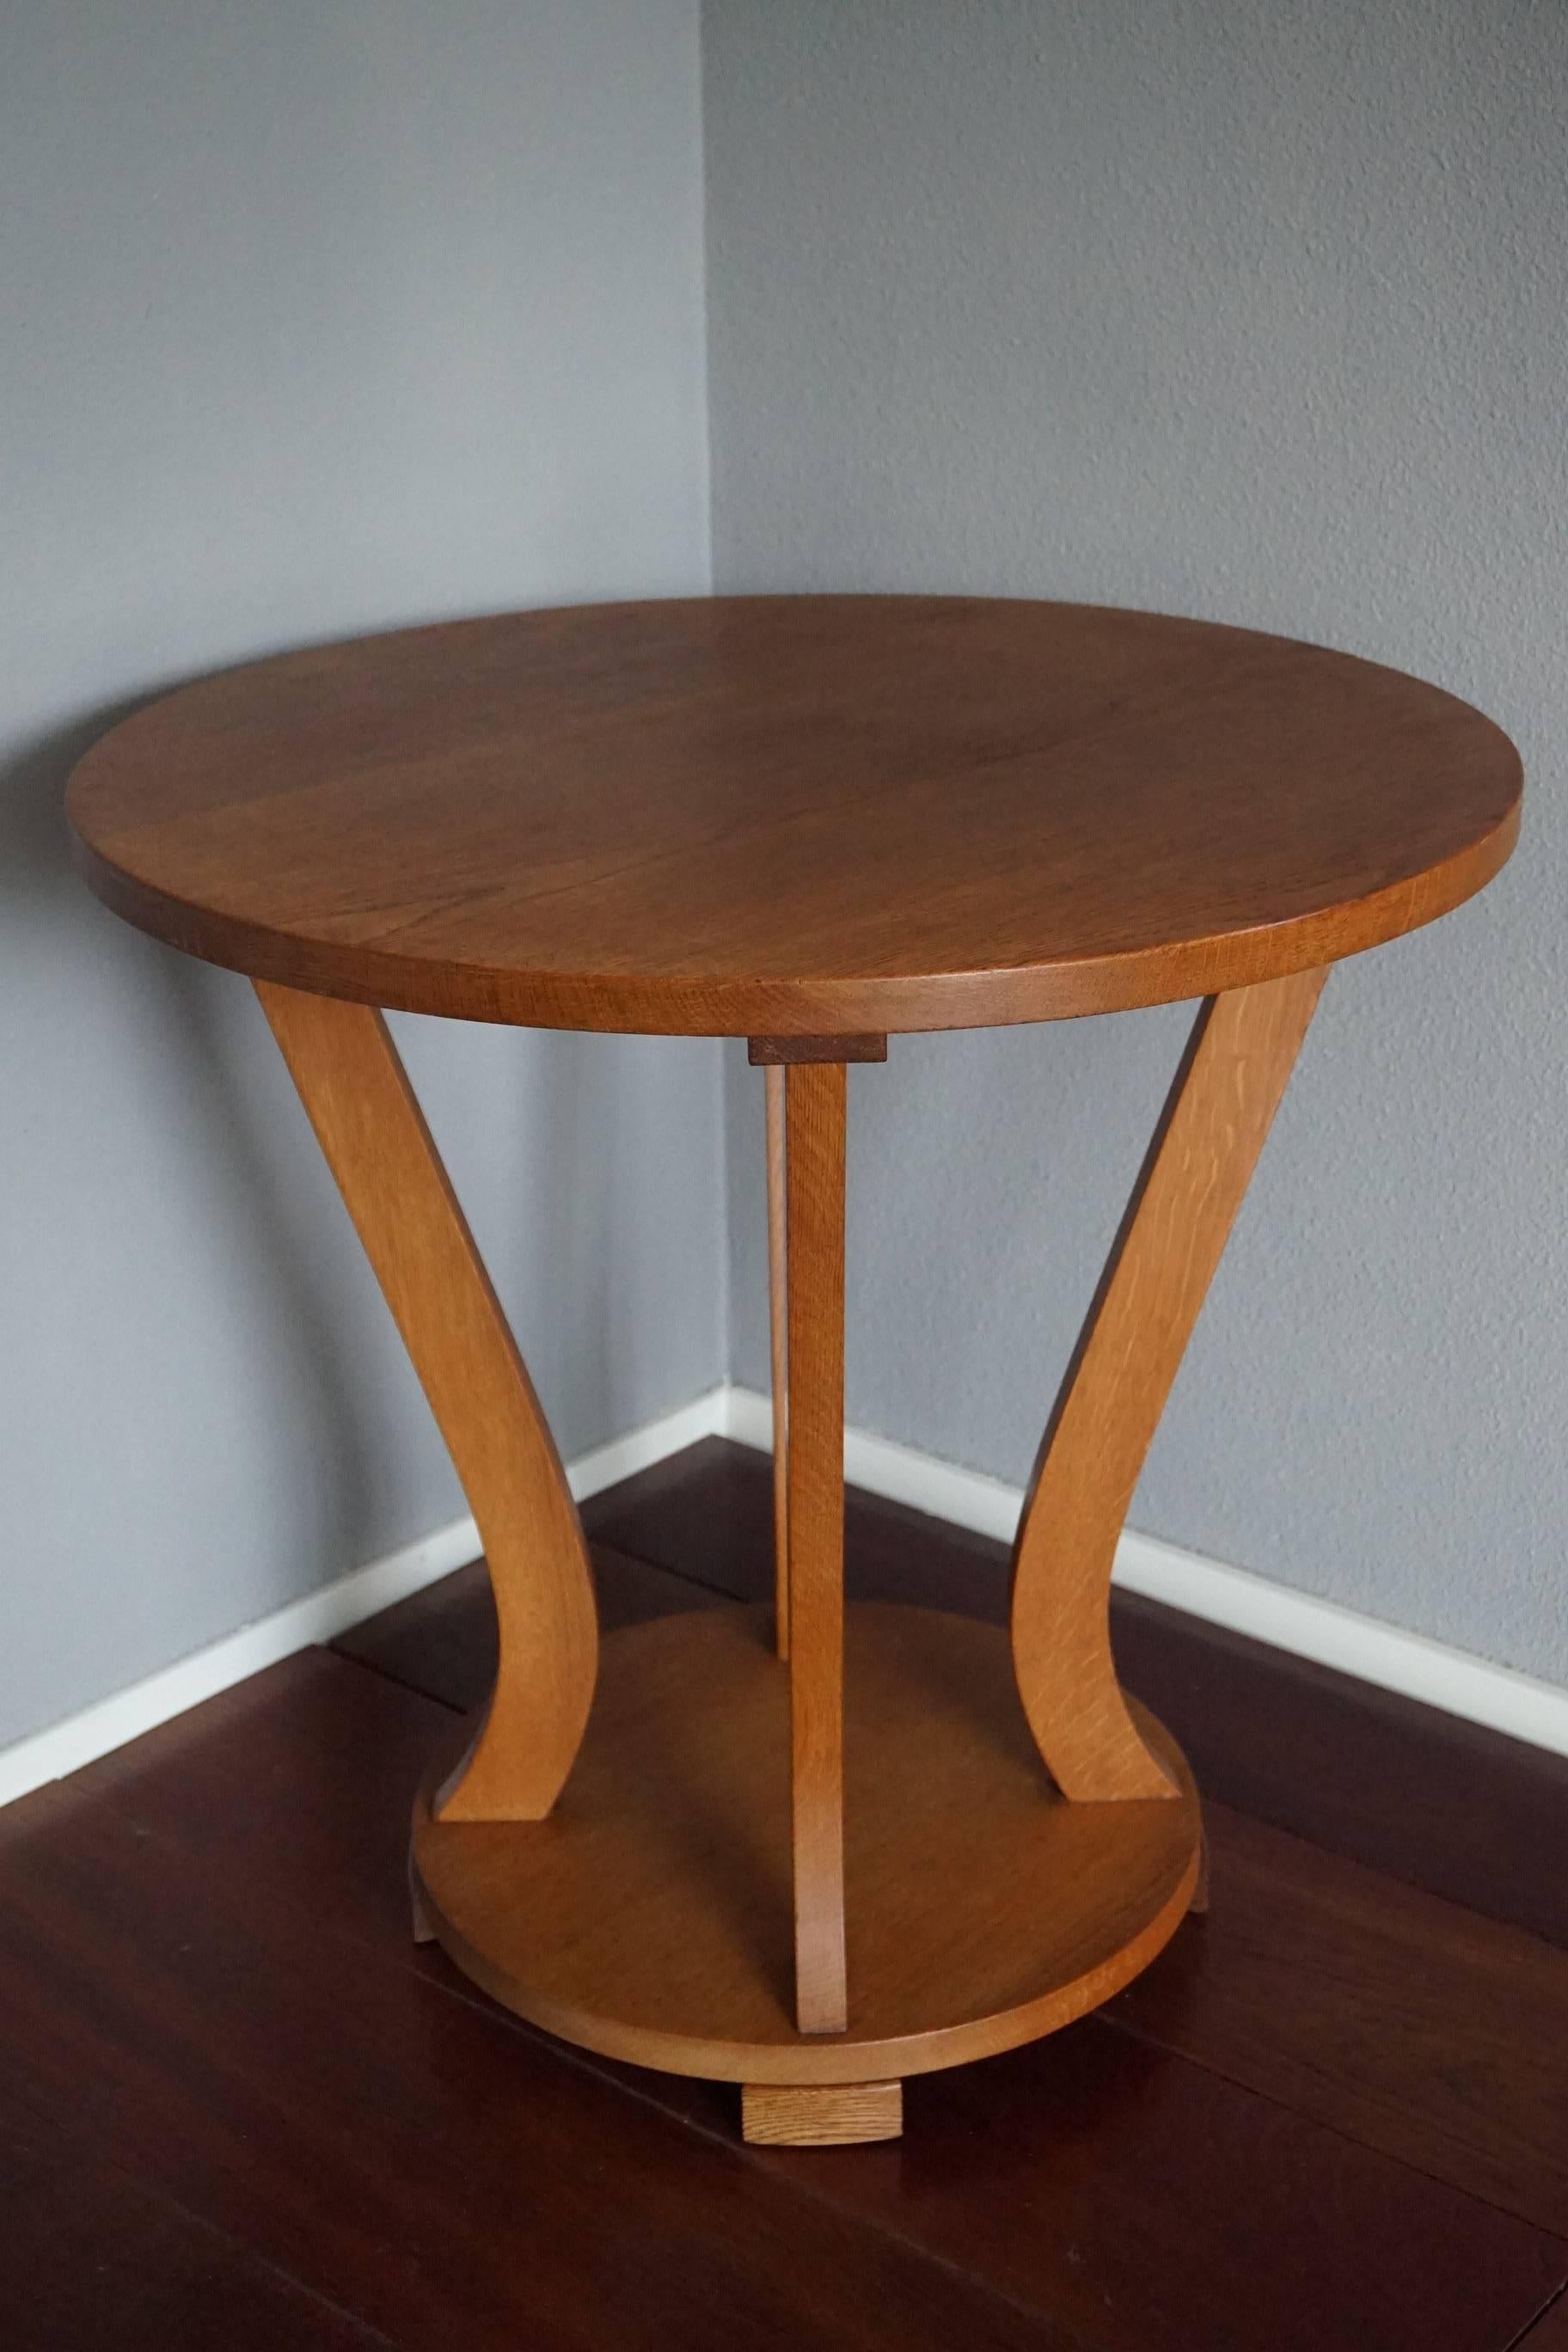 Hand-Crafted Early 20th Century, Circular Oak Art Deco Coffee Table or Side Table, 1920s